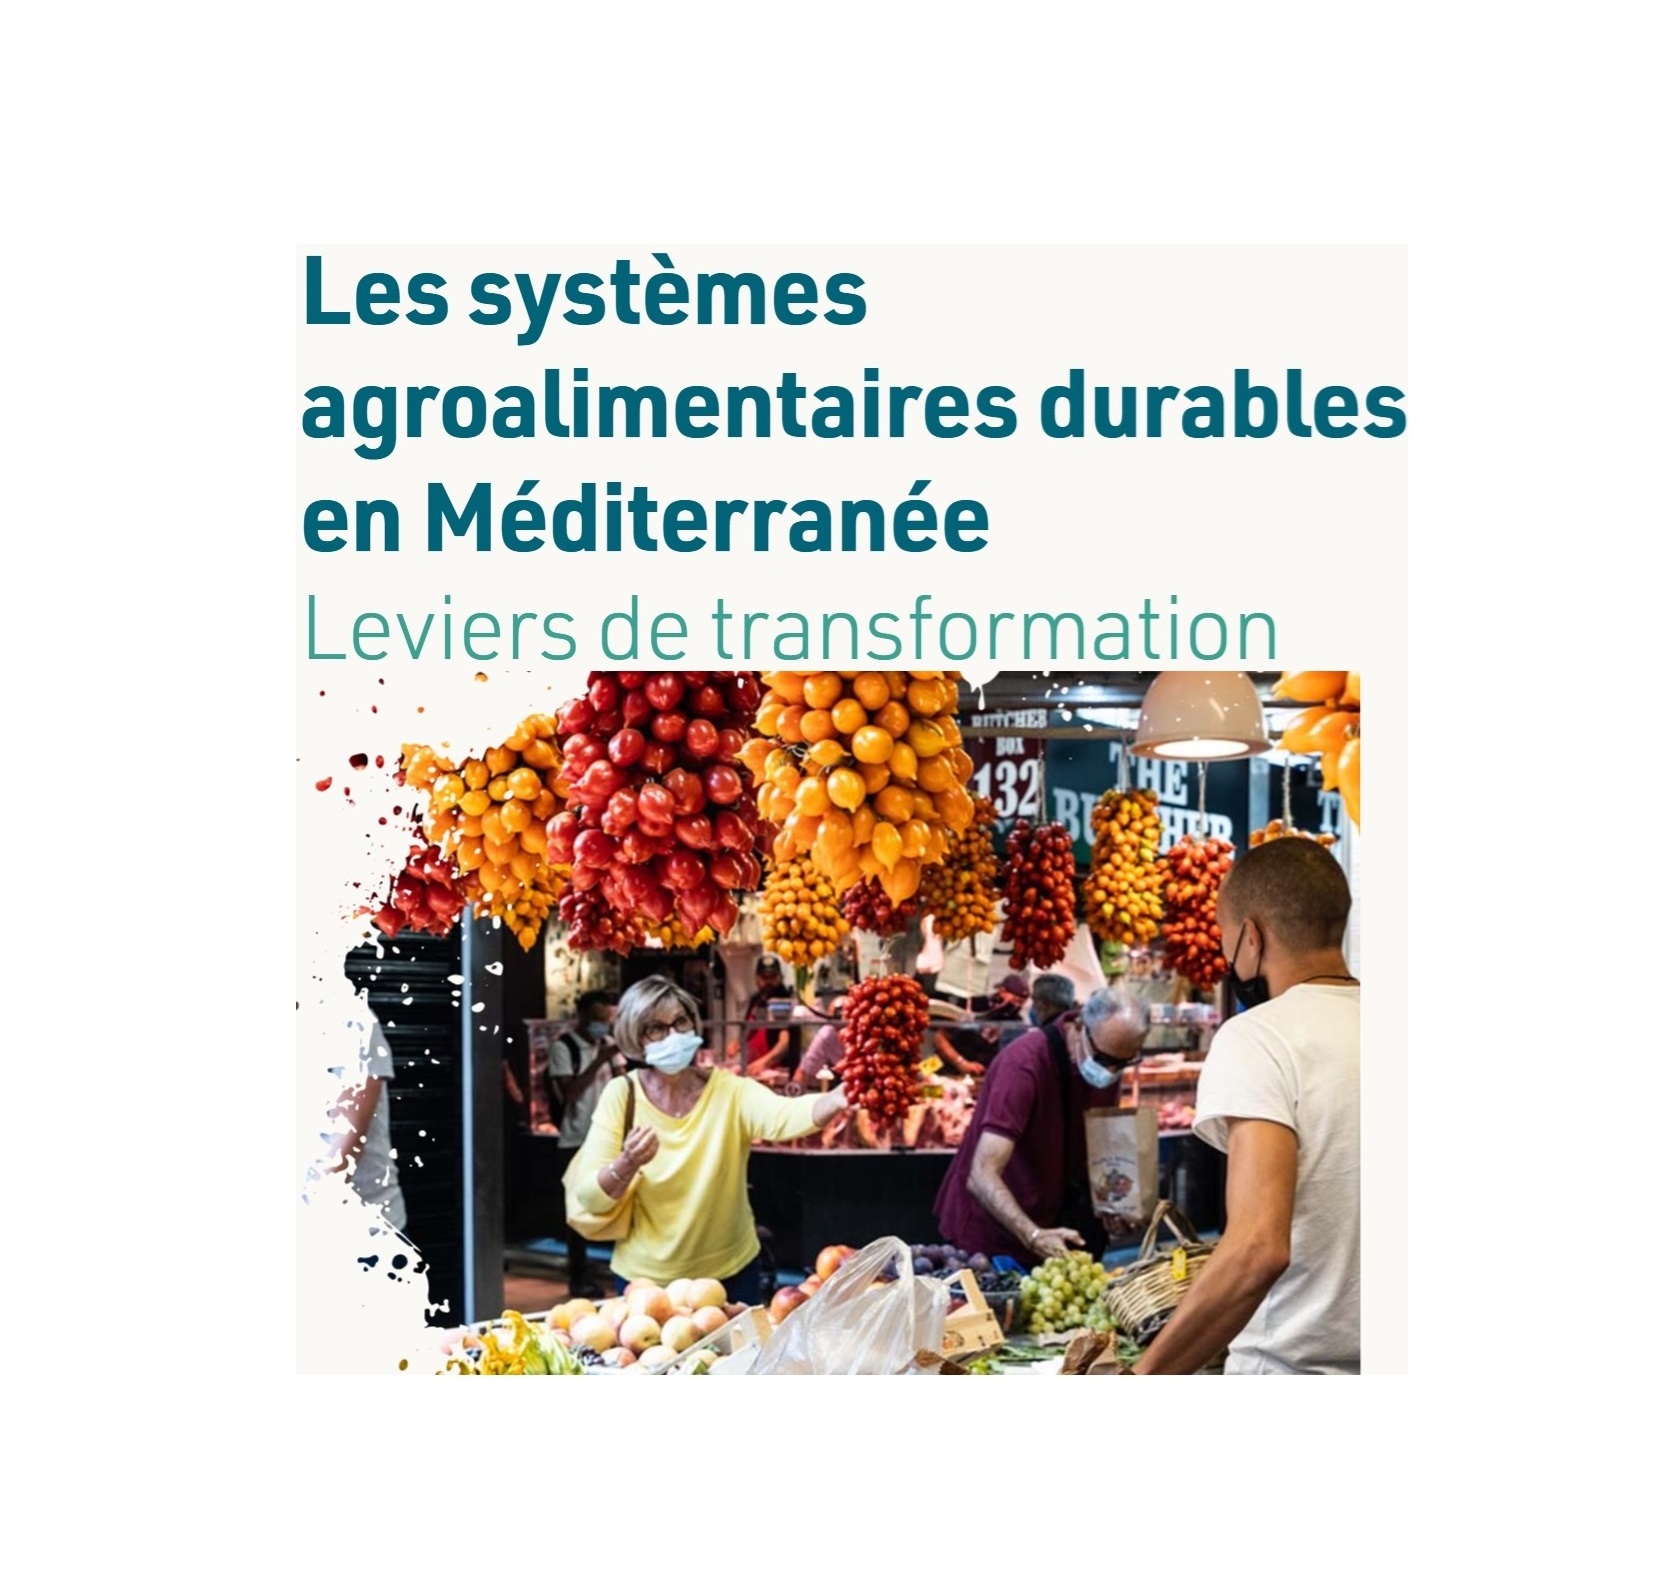 #SFS-MED: EXPLORING THE LEVERS FOR TRANSFORMING AGRI-FOOD SYSTEMS